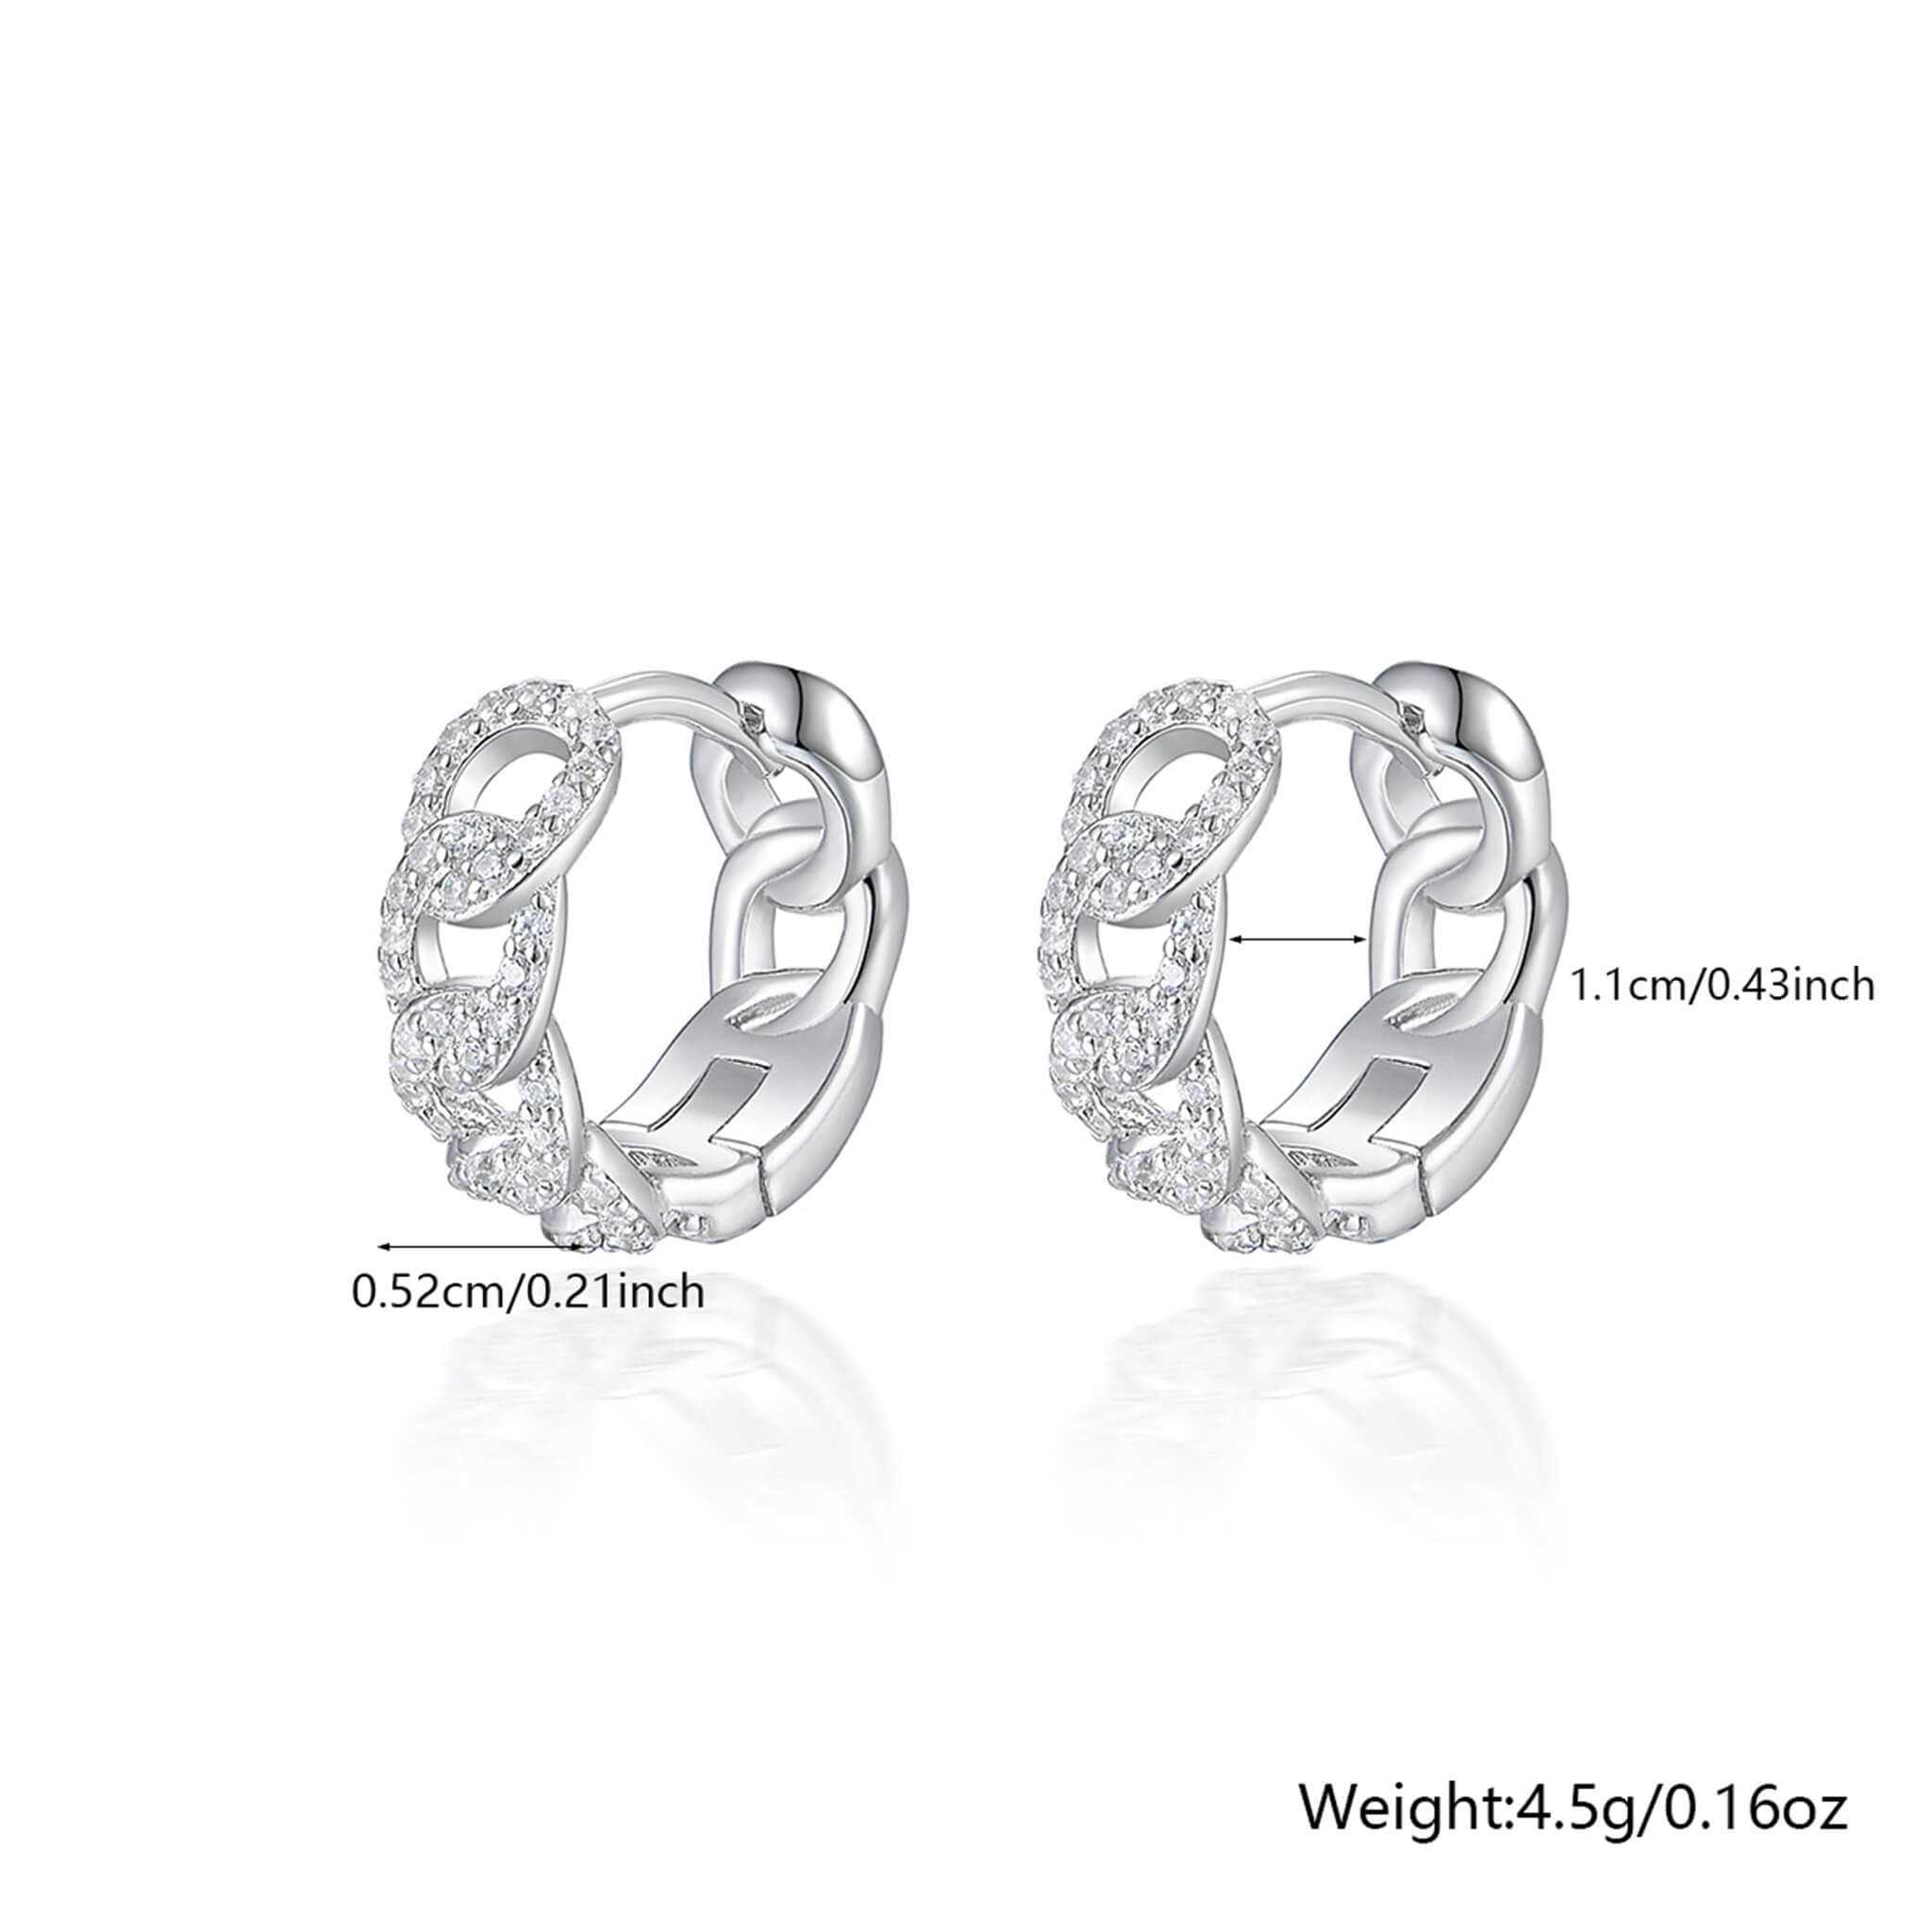 925 Silver Hollow Circle Earrings with Waterdrop Zircon Inlay - Versatile Halloween Accessory  UponBasics B Silver 